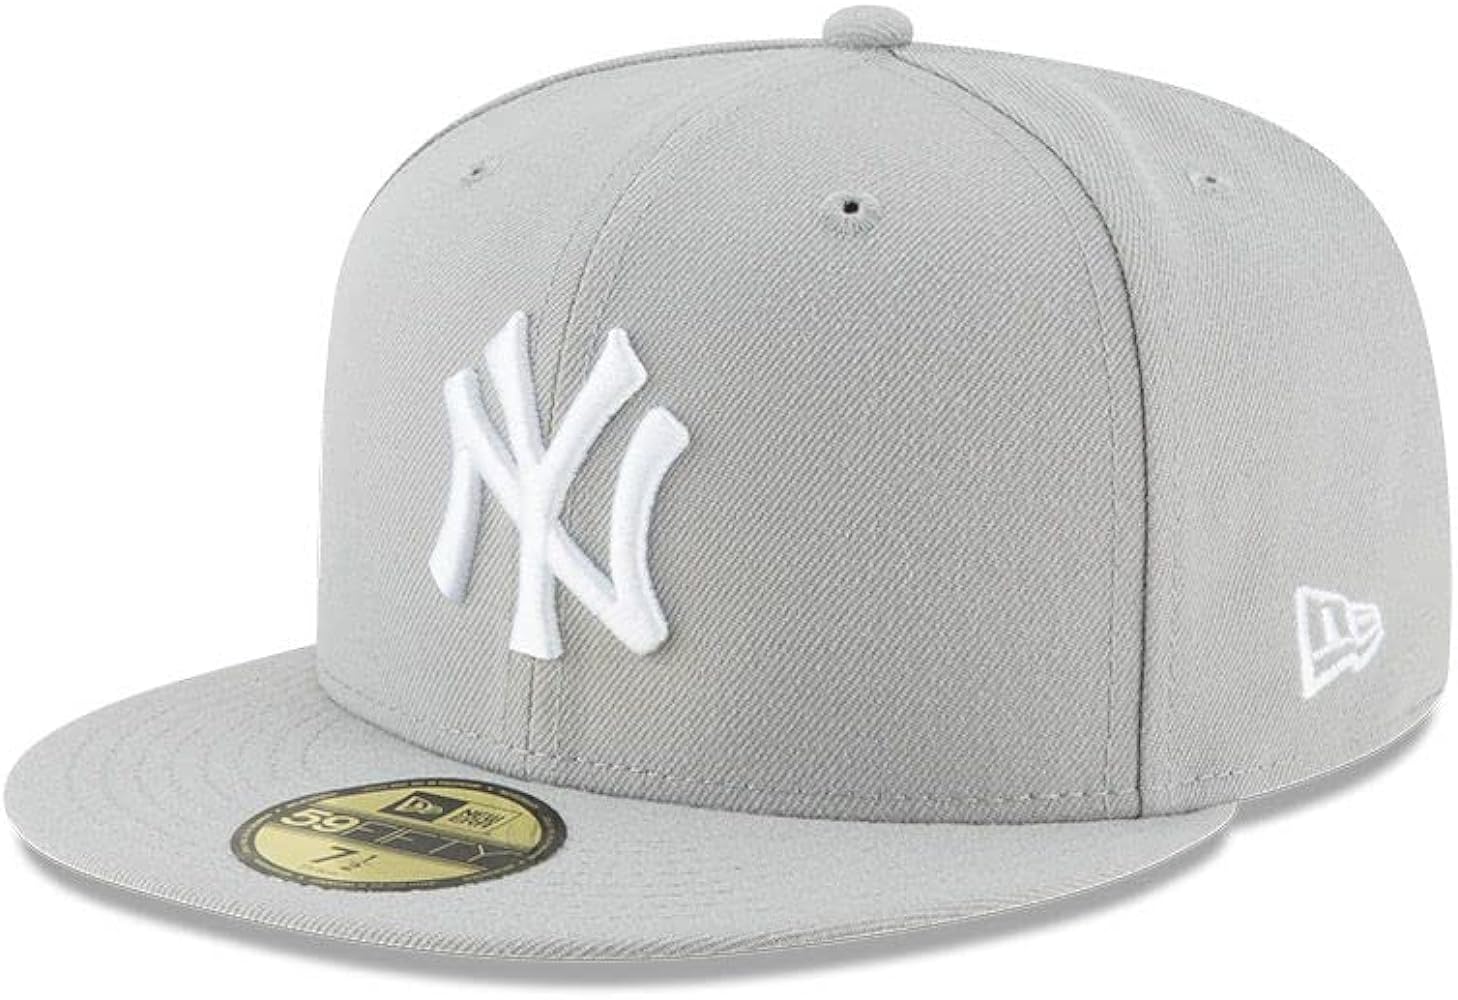 Are You a Diehard Yankees Fan: 8 Must-Have New Era Caps and Hats for True Fans